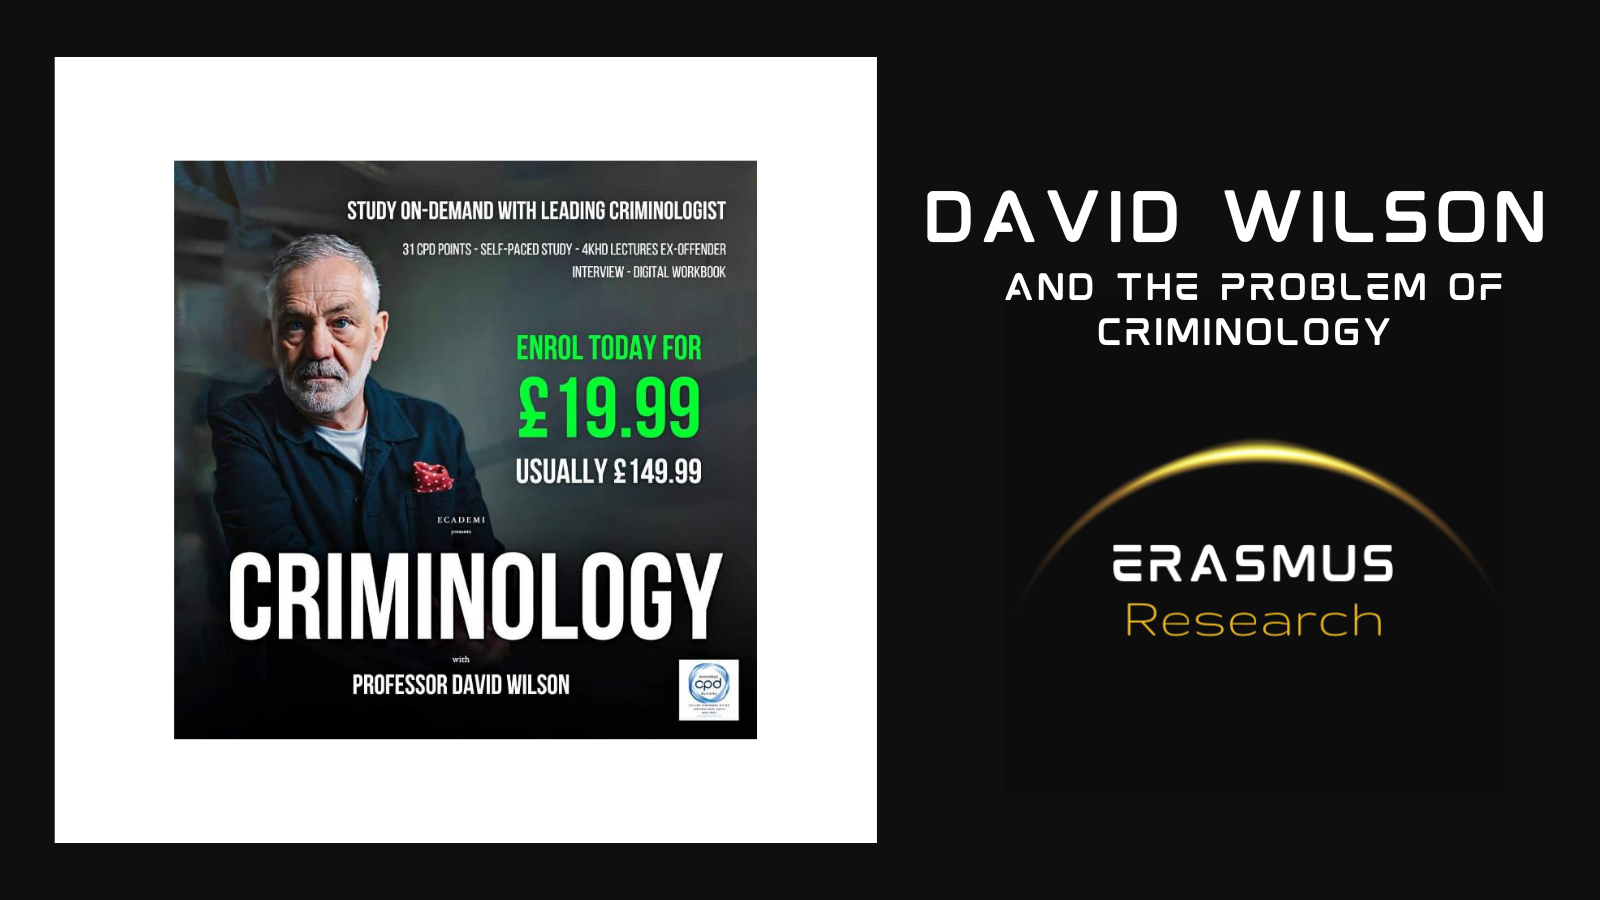 David Wilson and the Problem of Criminology